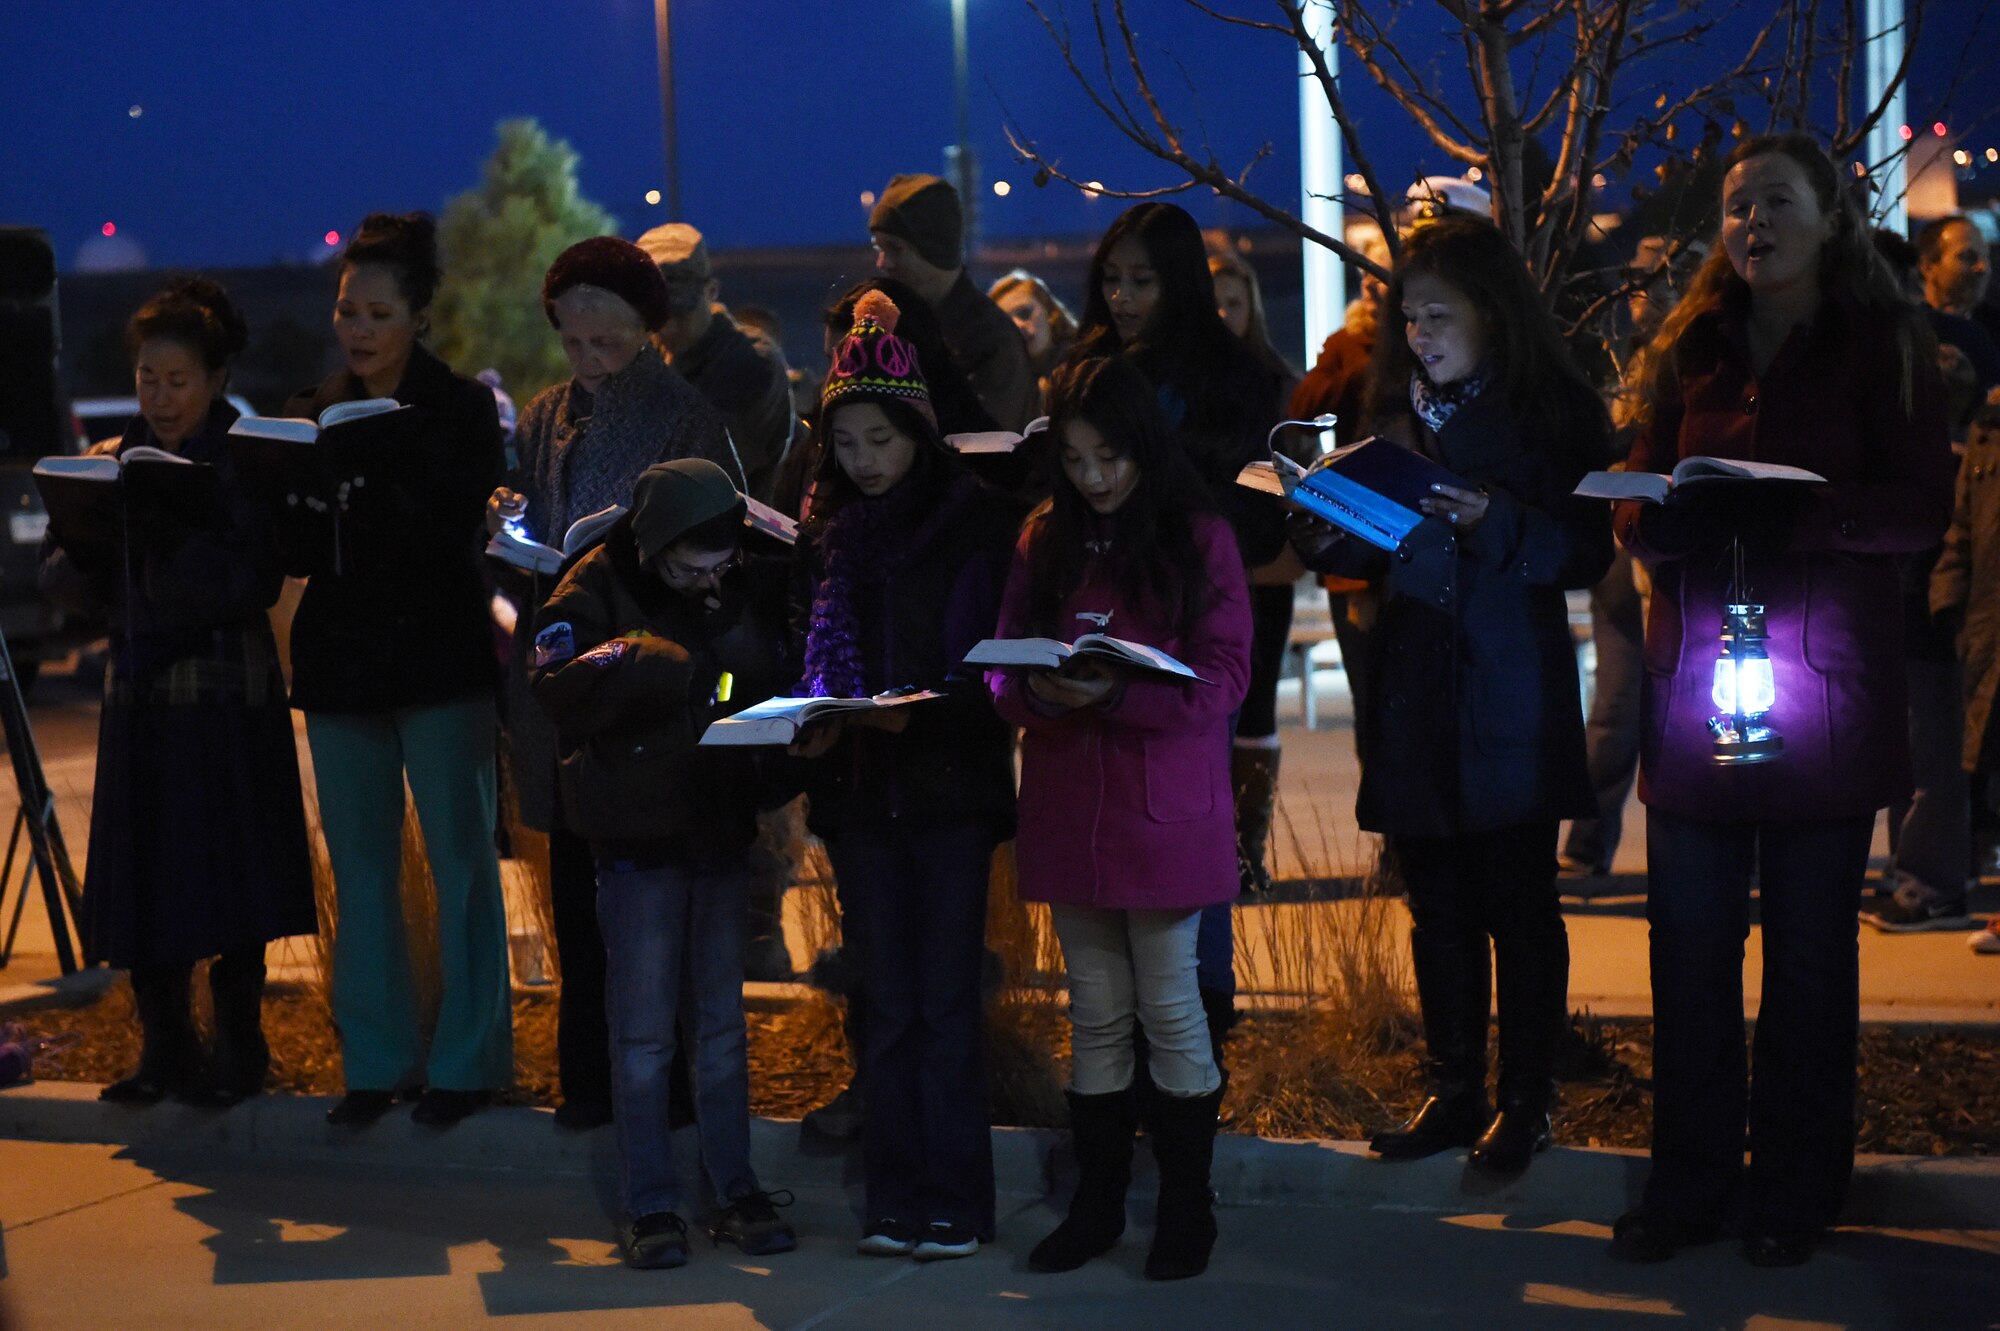 Members of the Buckley Chapel Catholic Choir Group sing Christmas songs during a tree-lighting ceremony Dec. 9, 2014, at the 460th Space Wing headquarters building on Buckley Air Force Base, Colo. The annual tree lighting concluded with a visit from the 460th SW mascot, Buck Lee, dressed as Santa Claus, as well as hot chocolate and cookies. (U.S. Air Force photo by Airman 1st Class Samantha Saulsbury/Released)